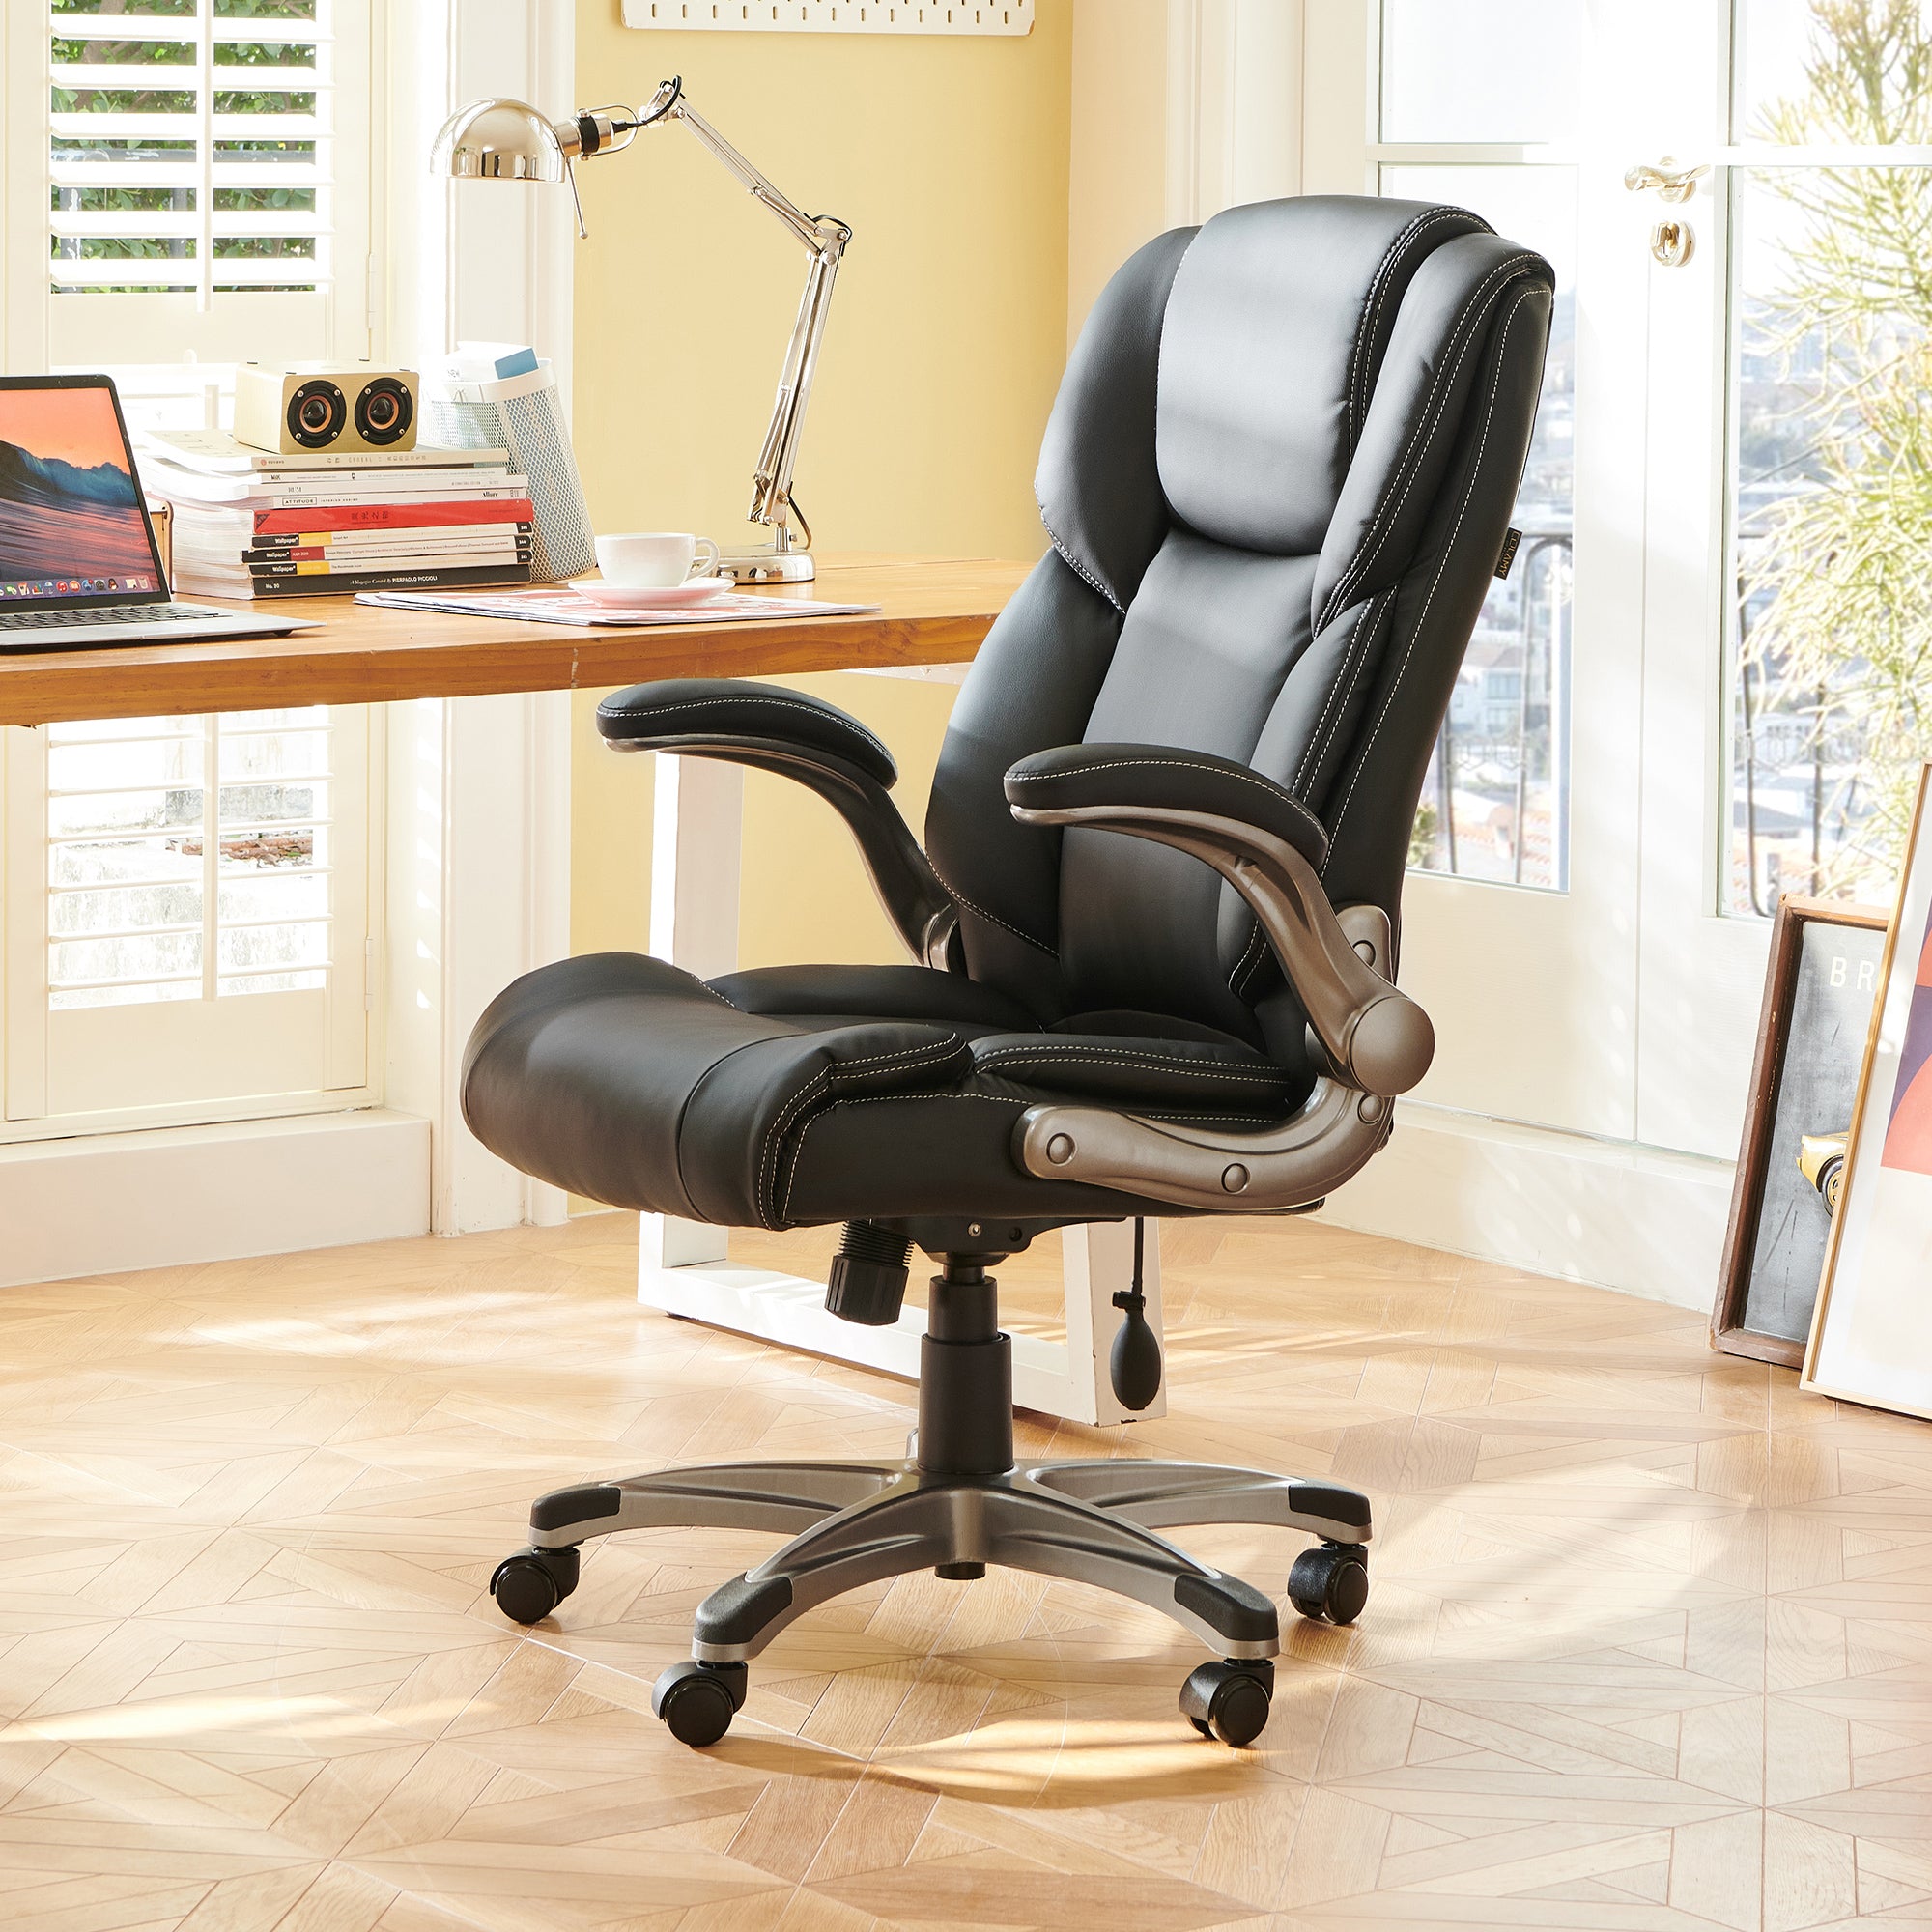 COLAMY PU Leather Office Chair with Inflatable Lumbar Support